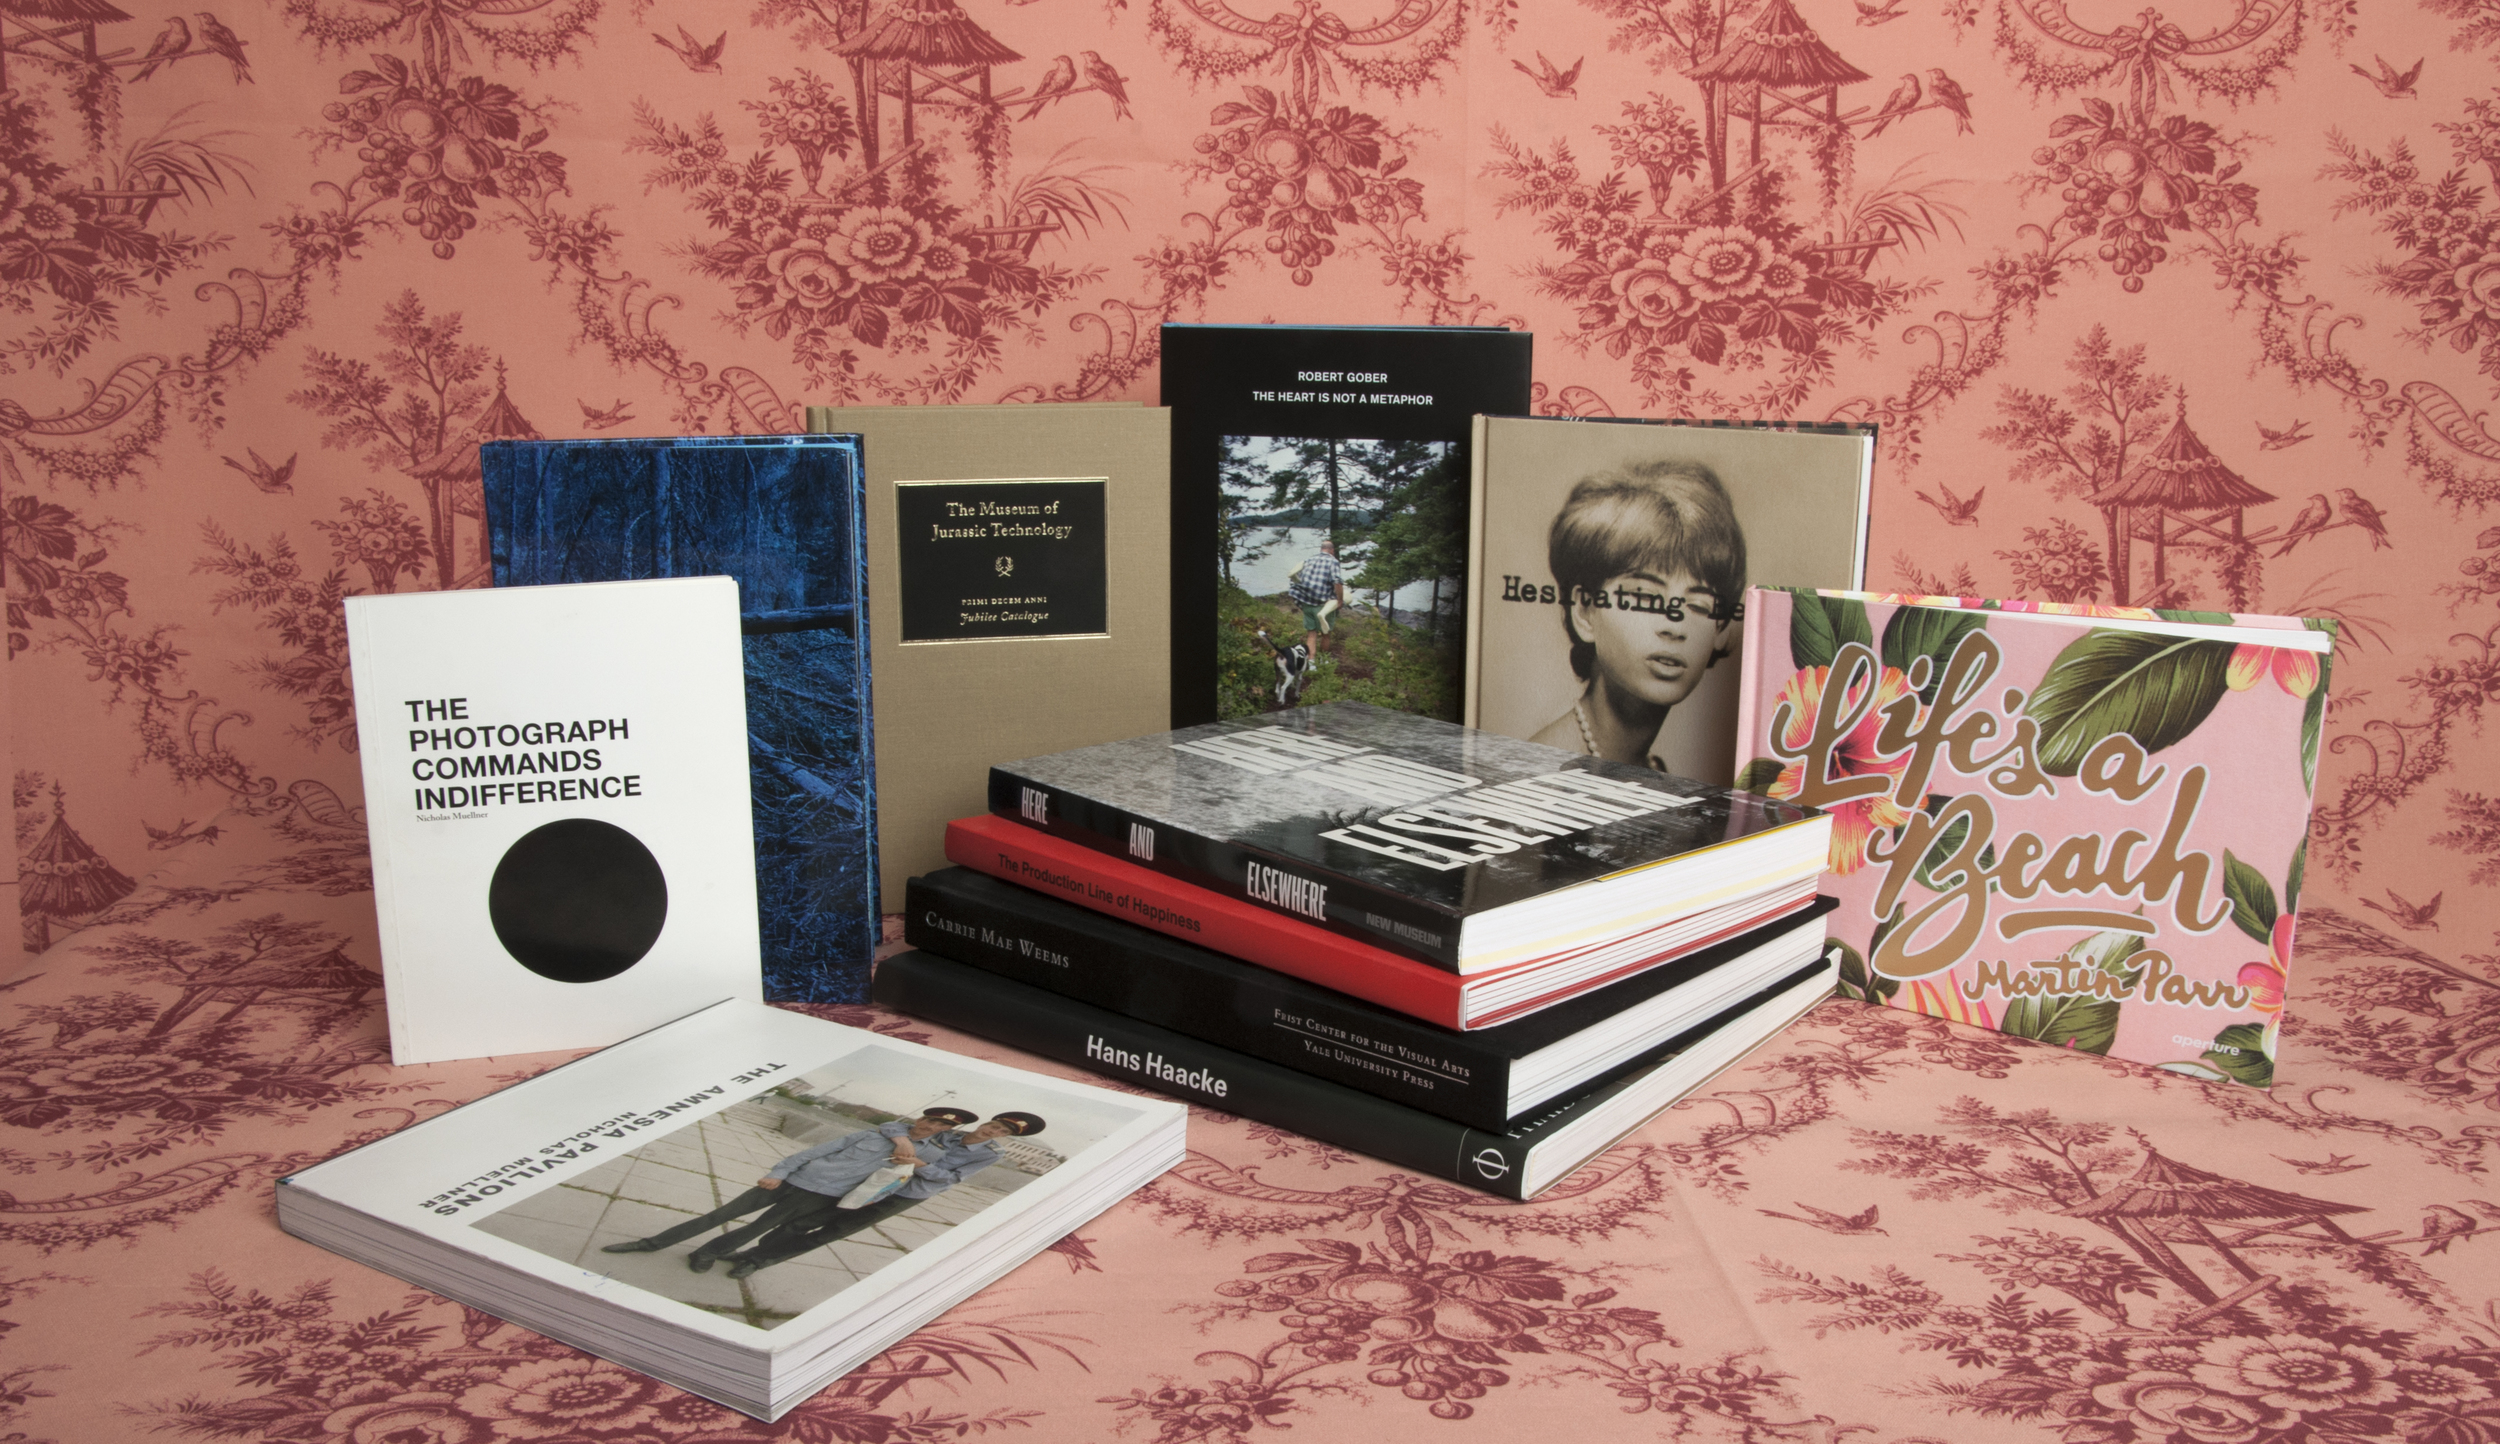  Portraits of books that influenced me at the time of their capture. 2014.  To view a copy check out the ICP Library 